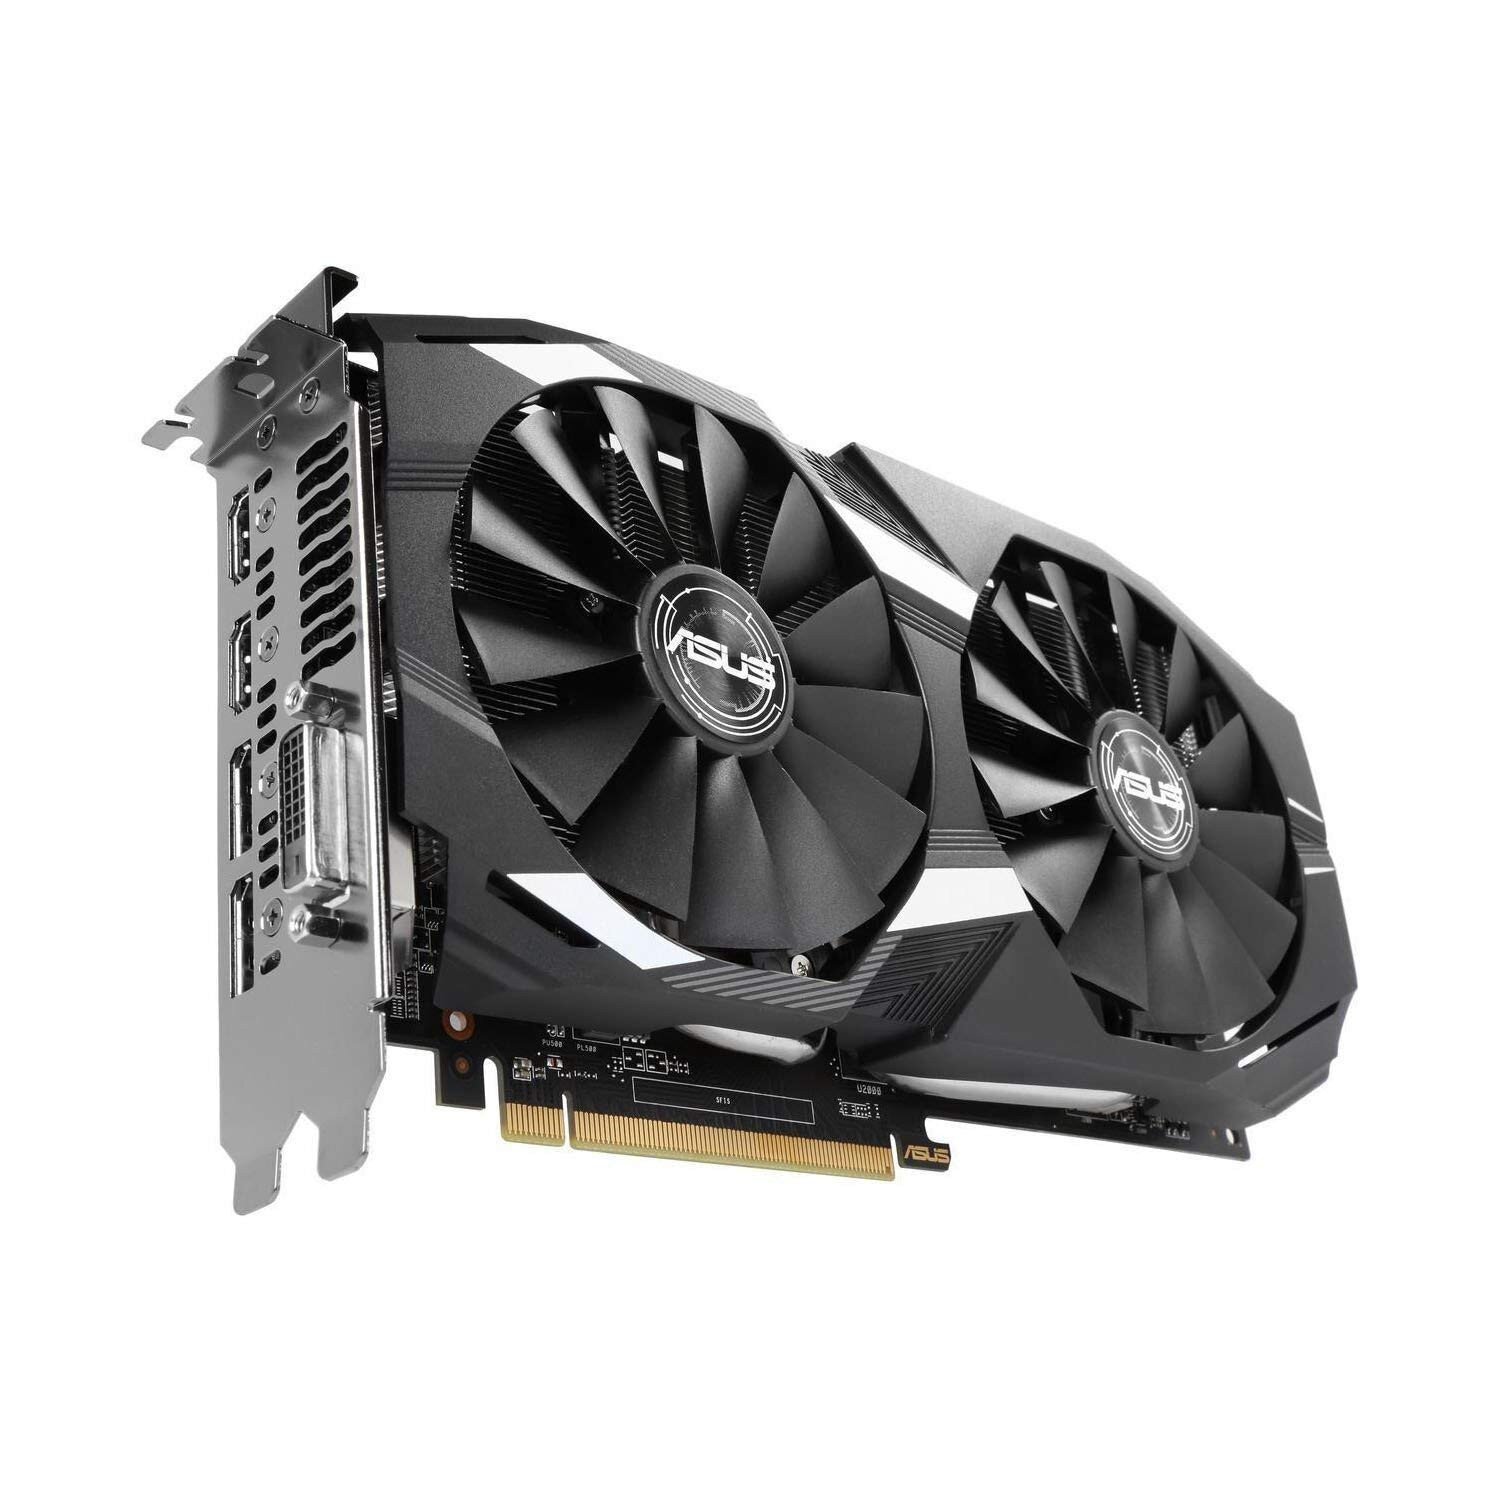 Best Best Graphics Card For Dual Monitor Gaming for Gamers